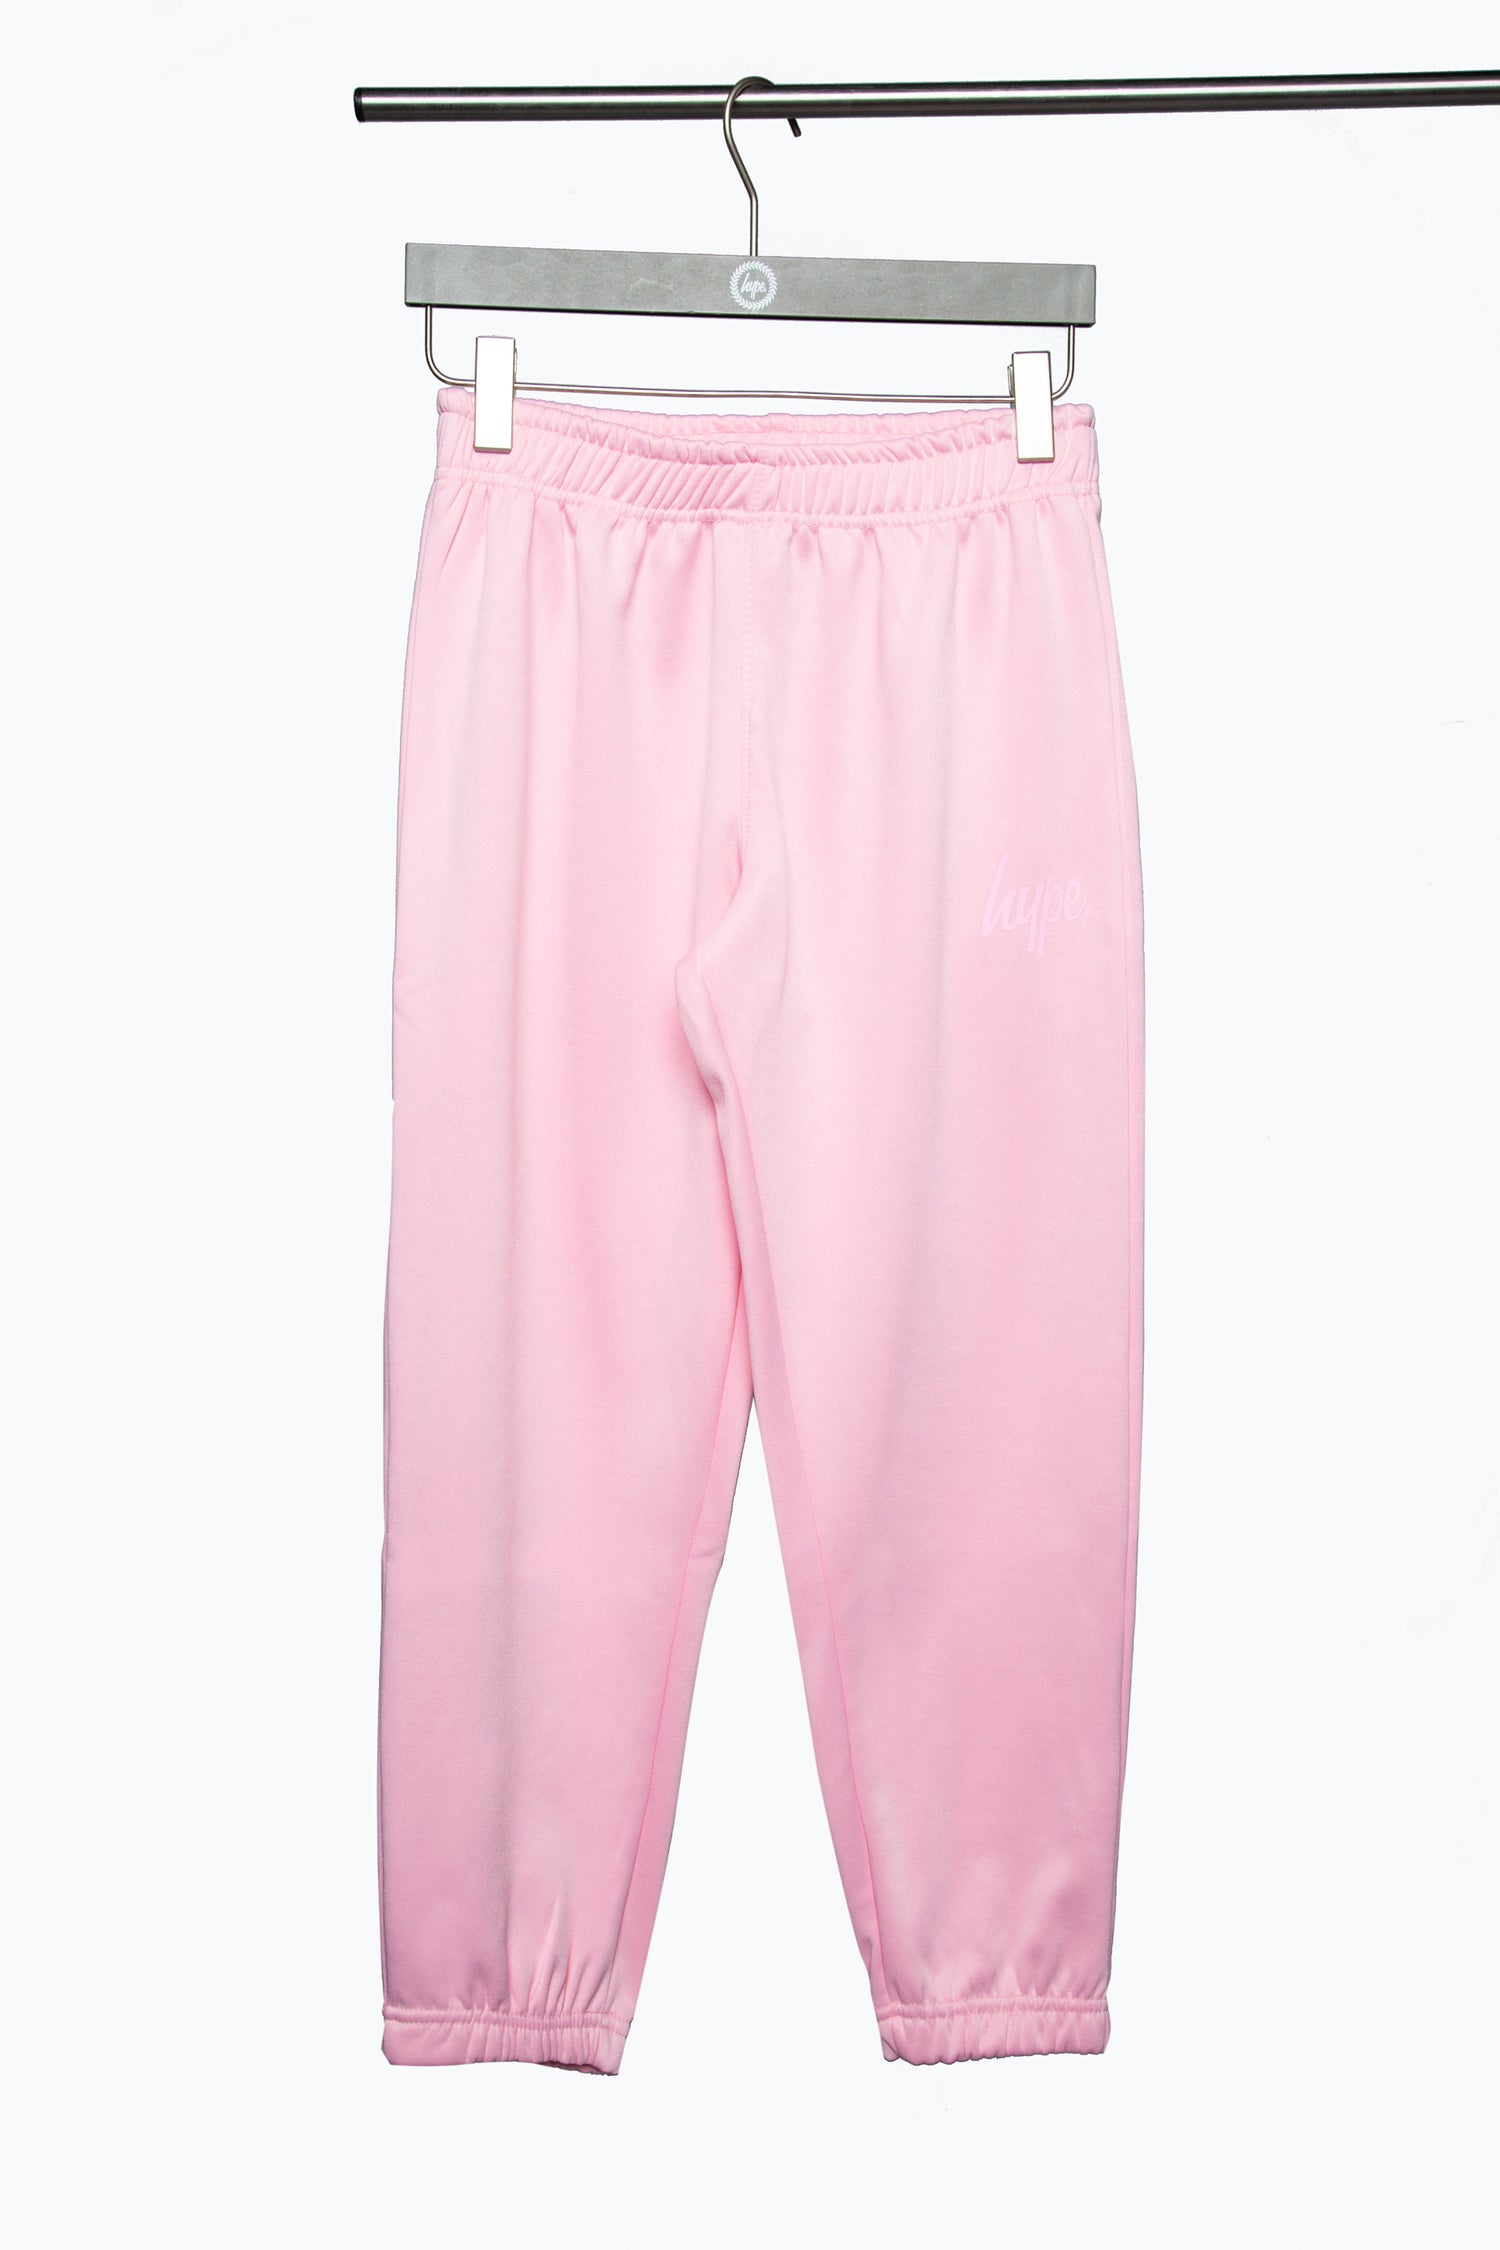 HYPE PINK ESSENTIAL GIRLS TRACKUIT